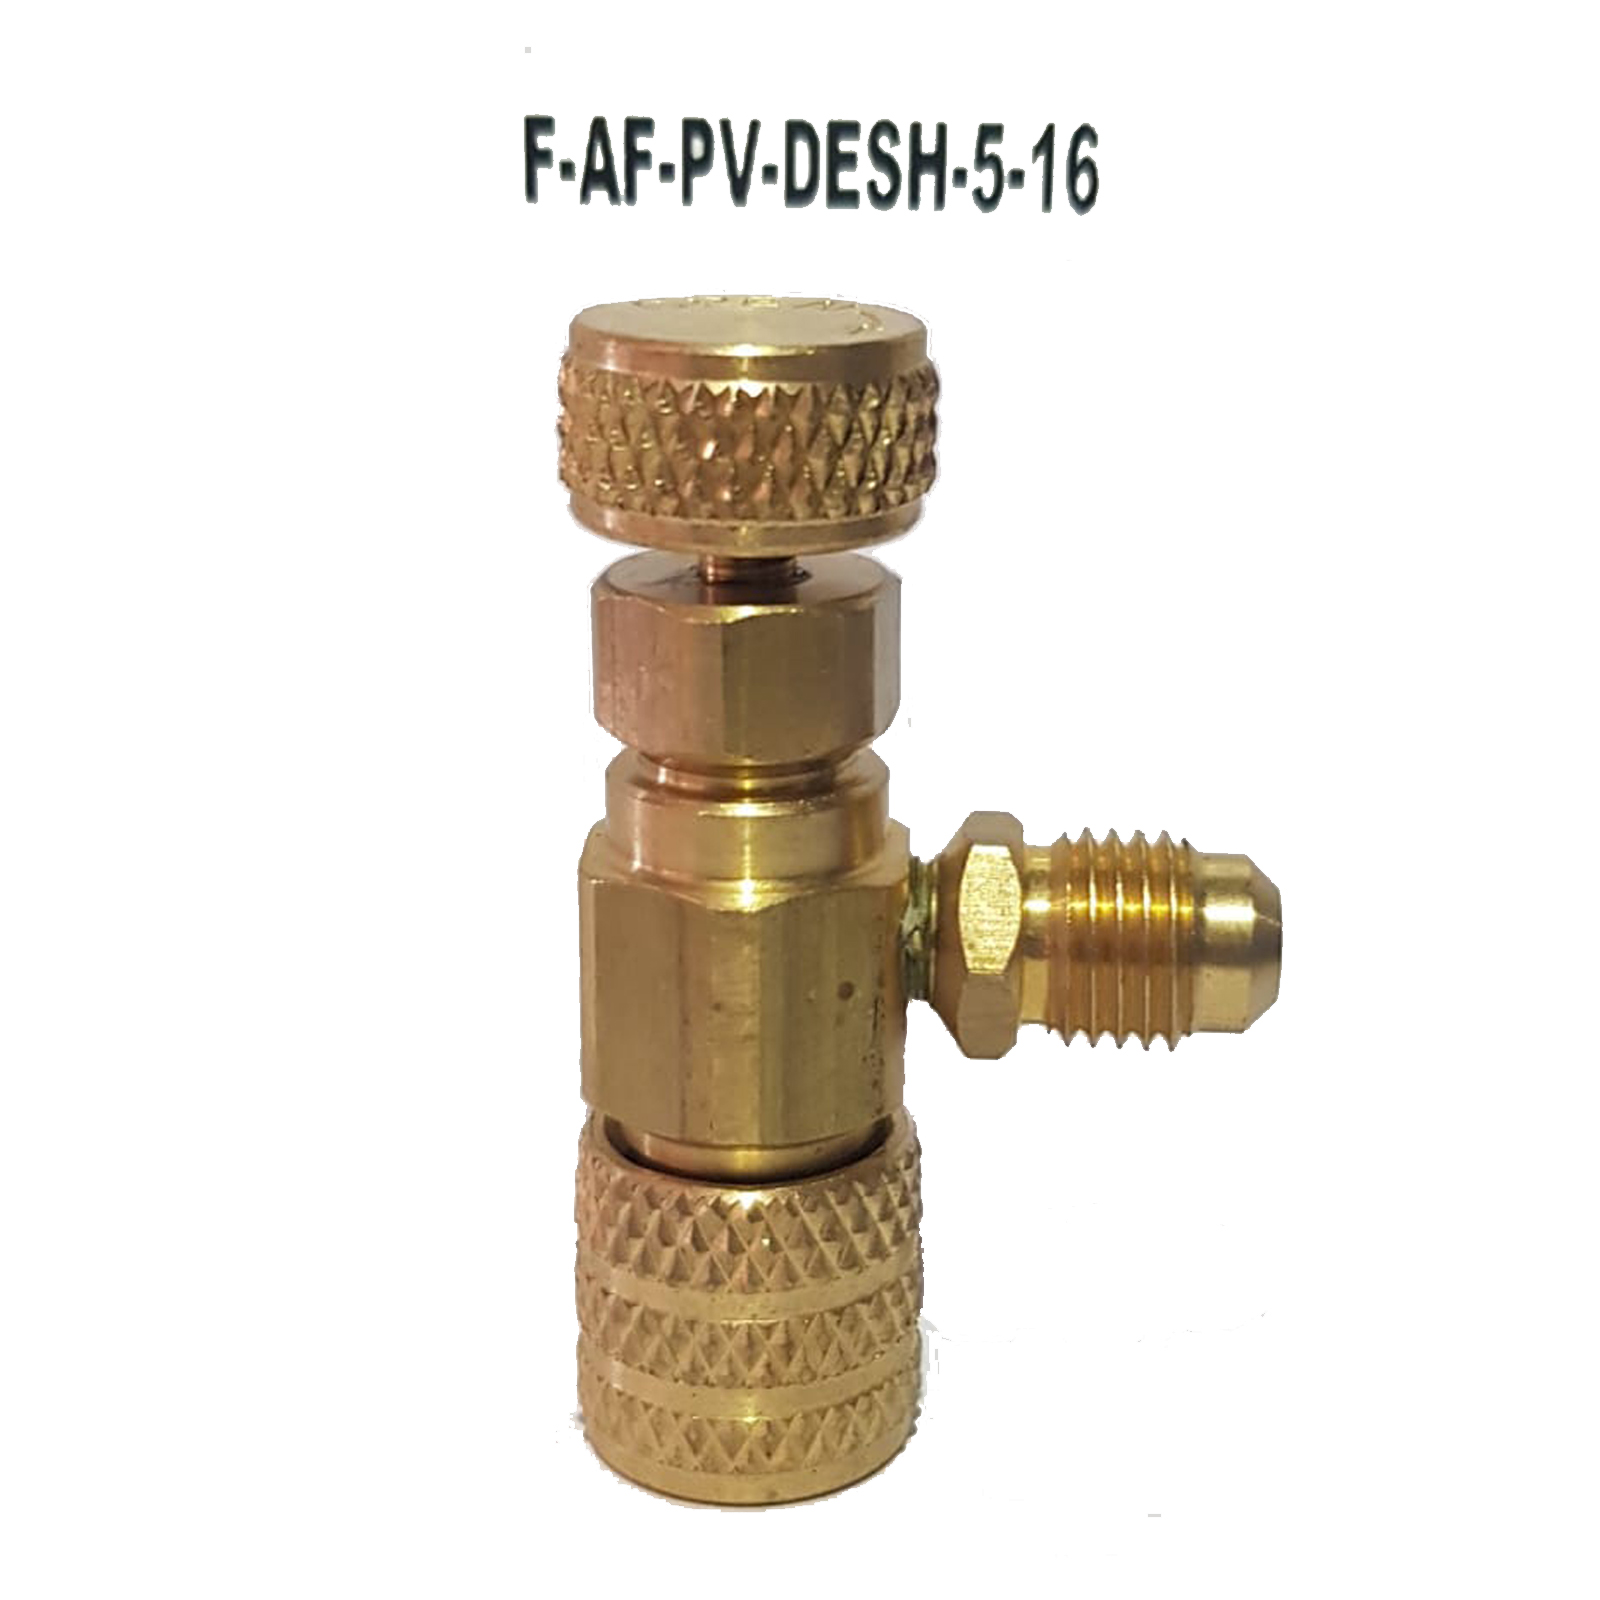 Retention control valve (shut-off) with depressor, for Schrader needle valves - 5/16 SAE female inlet and 1/4 SAE male side outlet - made in USA